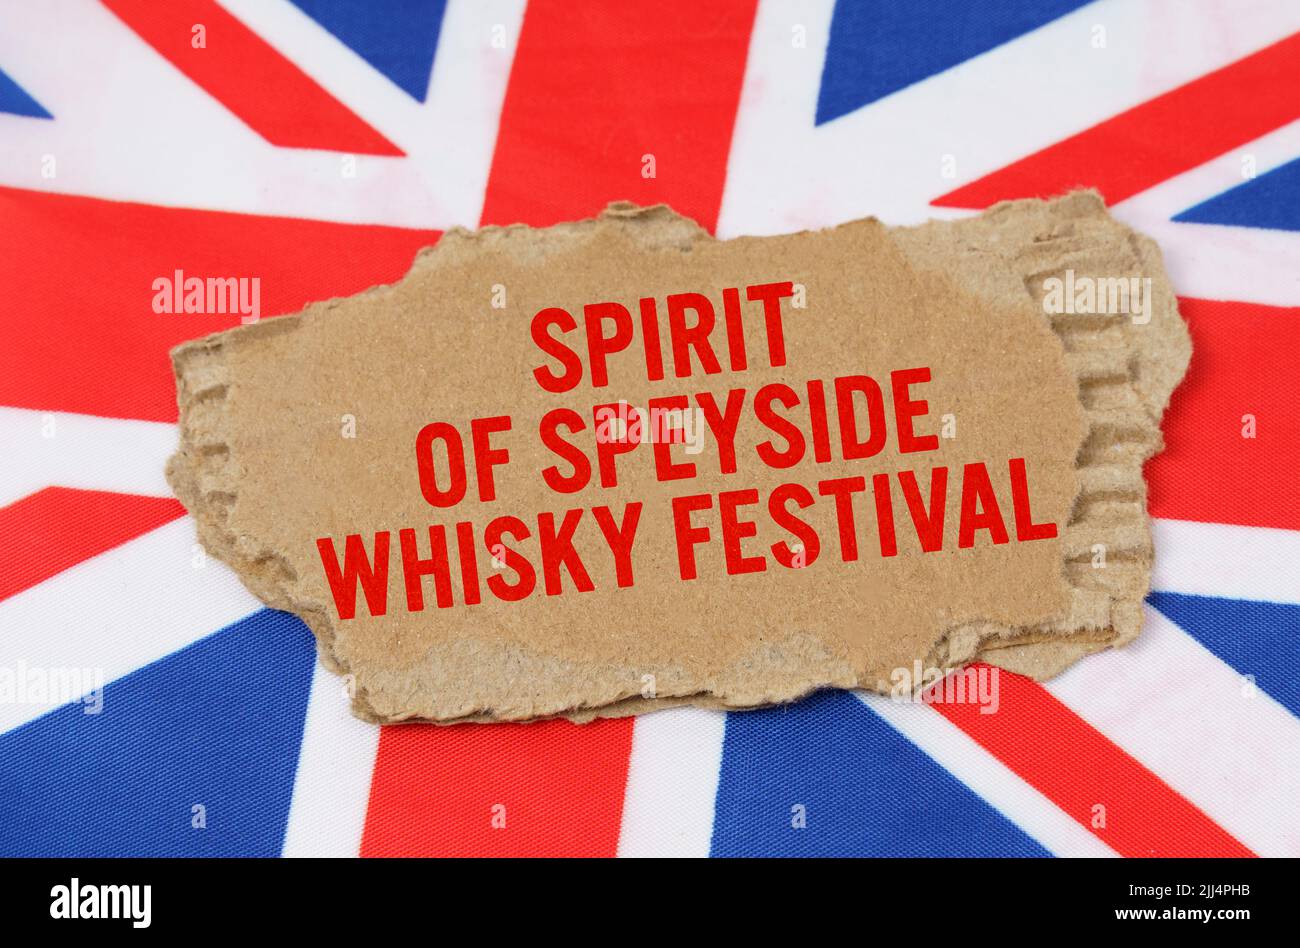 Holidays of the UK. Against the background of the flag of Great Britain lies cardboard with the inscription - Spirit of Speyside Whisky Festival Stock Photo